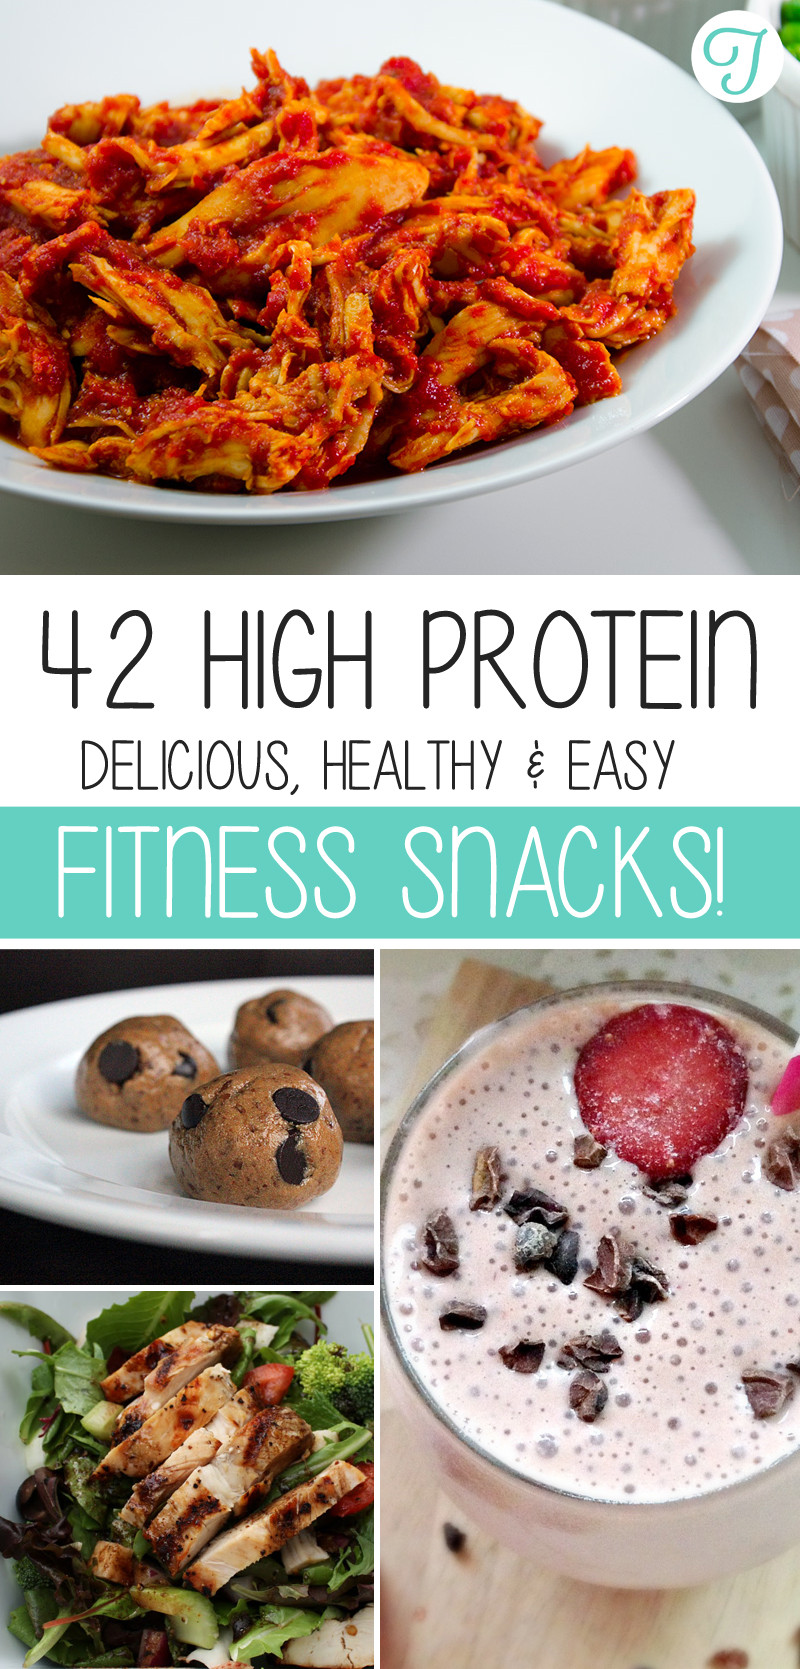 Healthy Protein Snacks
 42 Delicious High Protein Snacks You Must Try